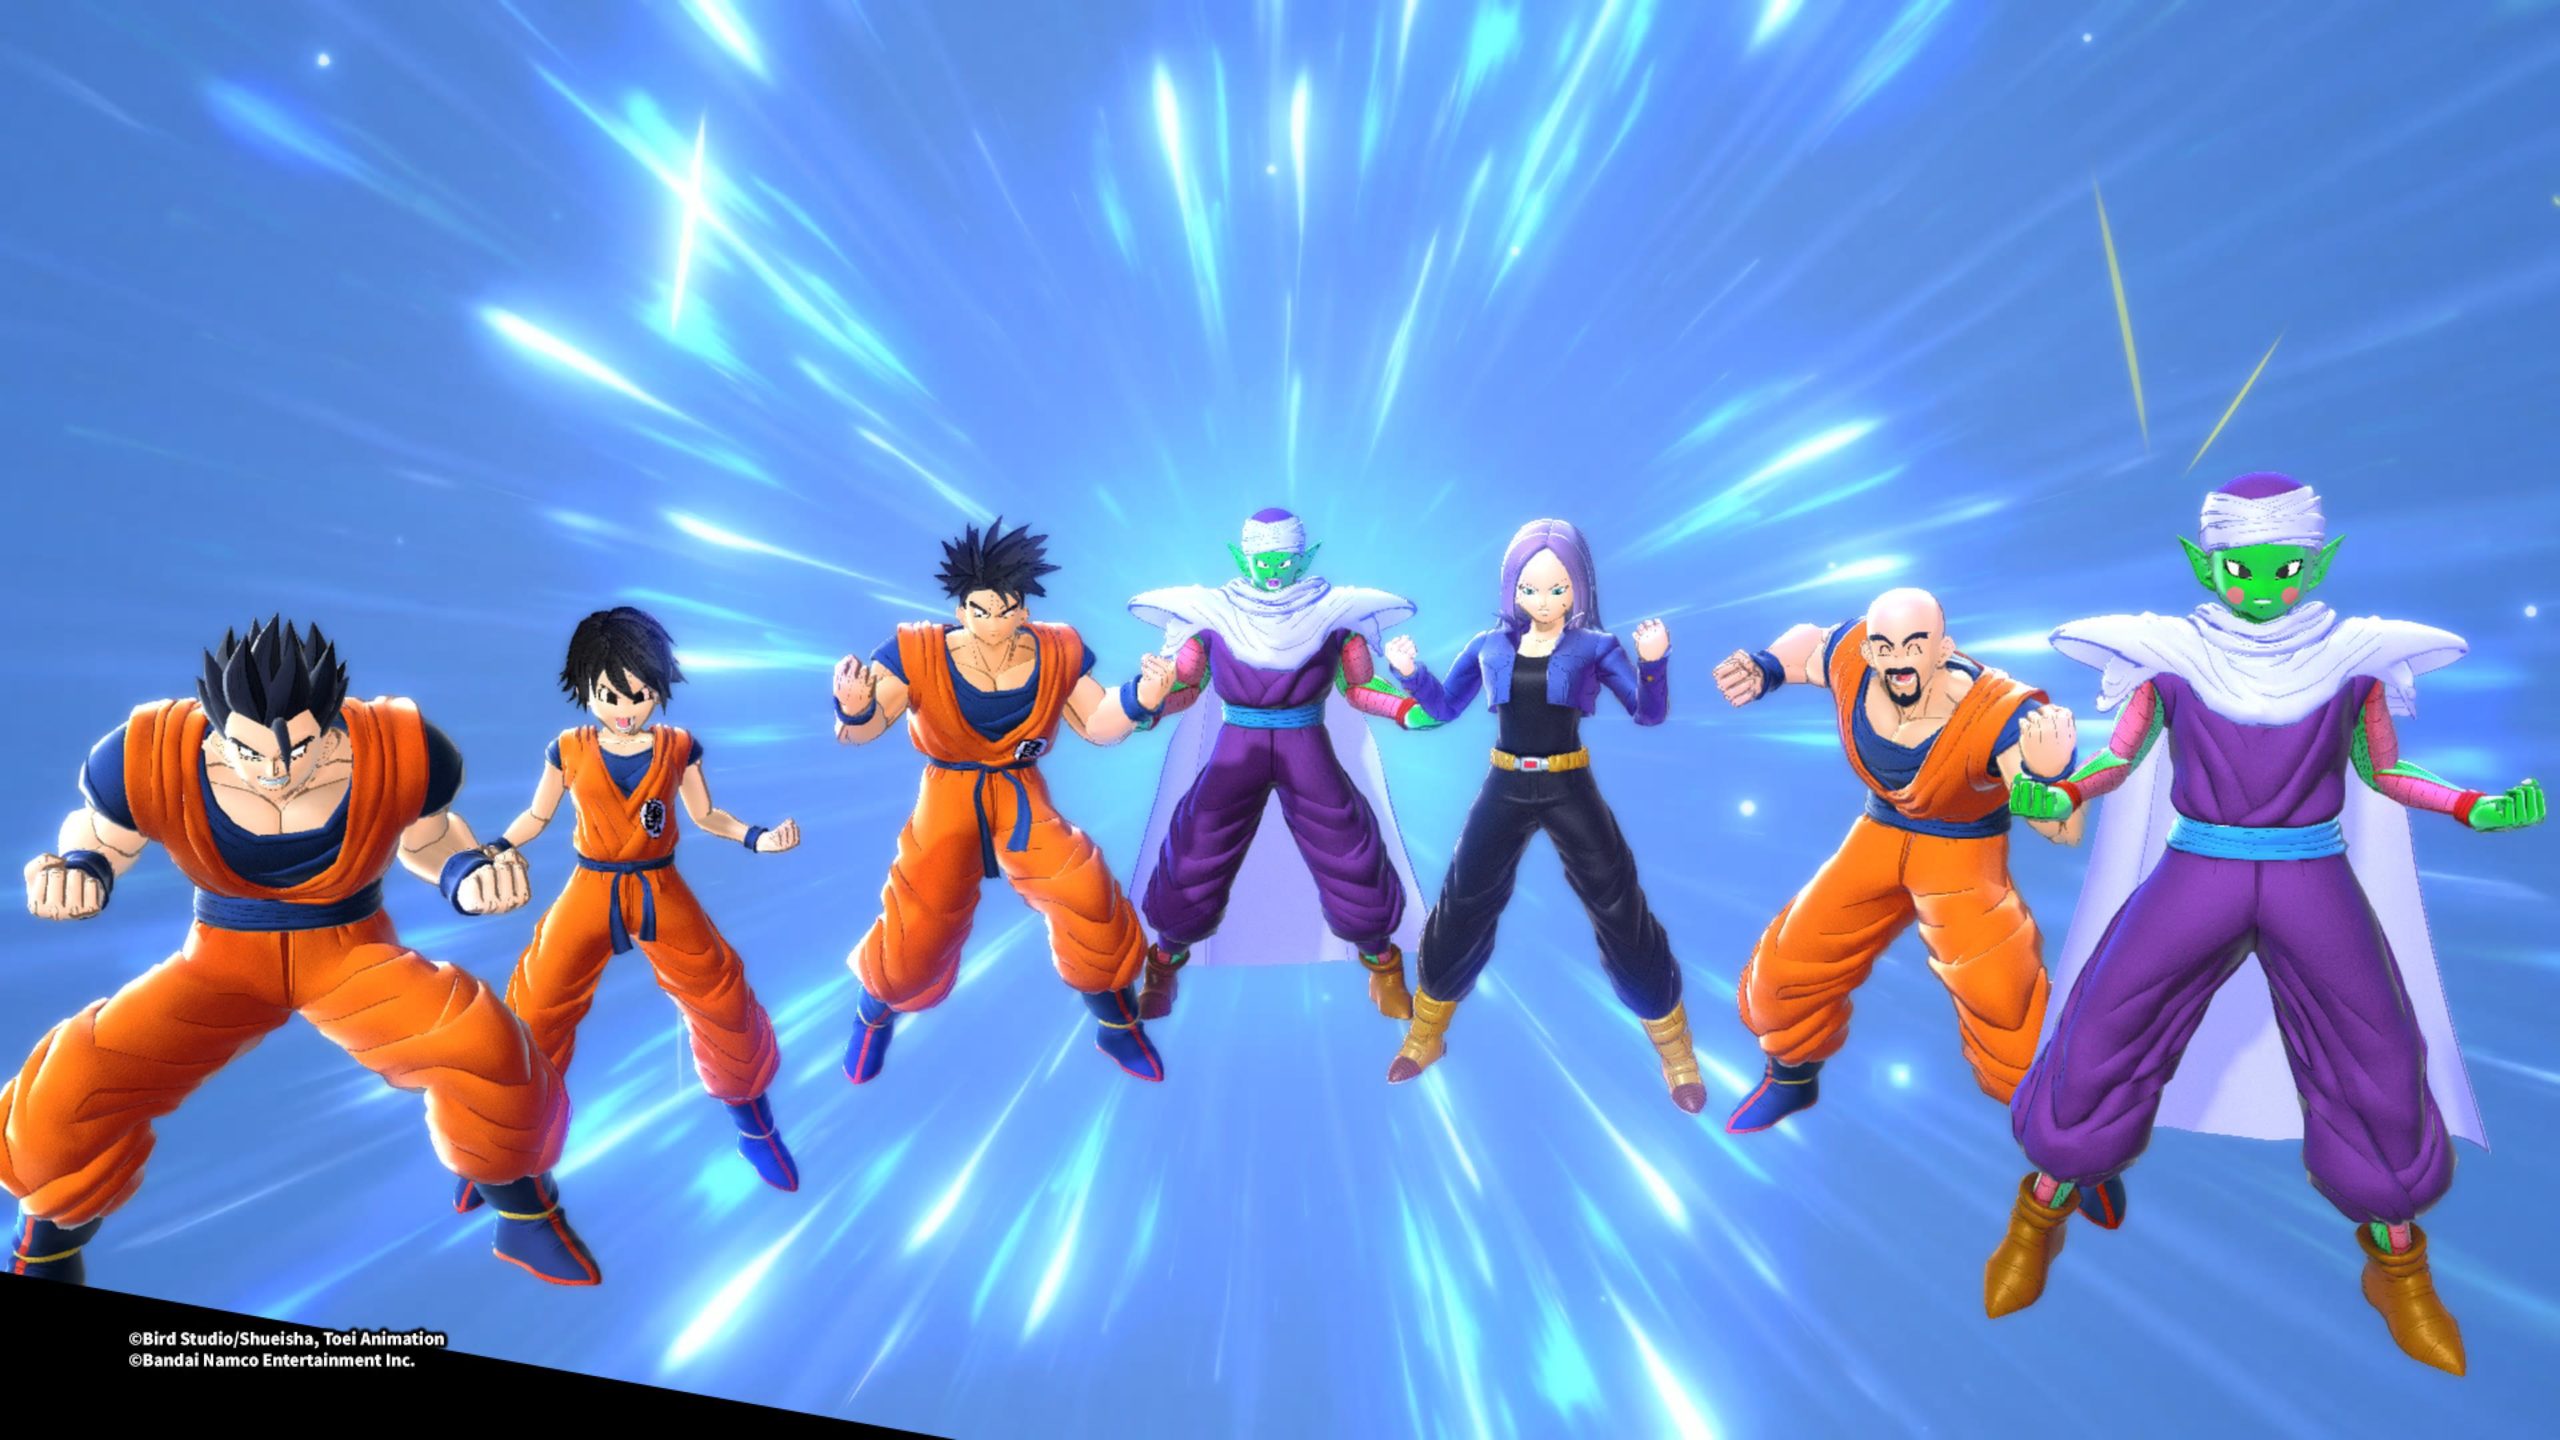 DRAGON BALL: THE BREAKERS Review · Survive or slaughter